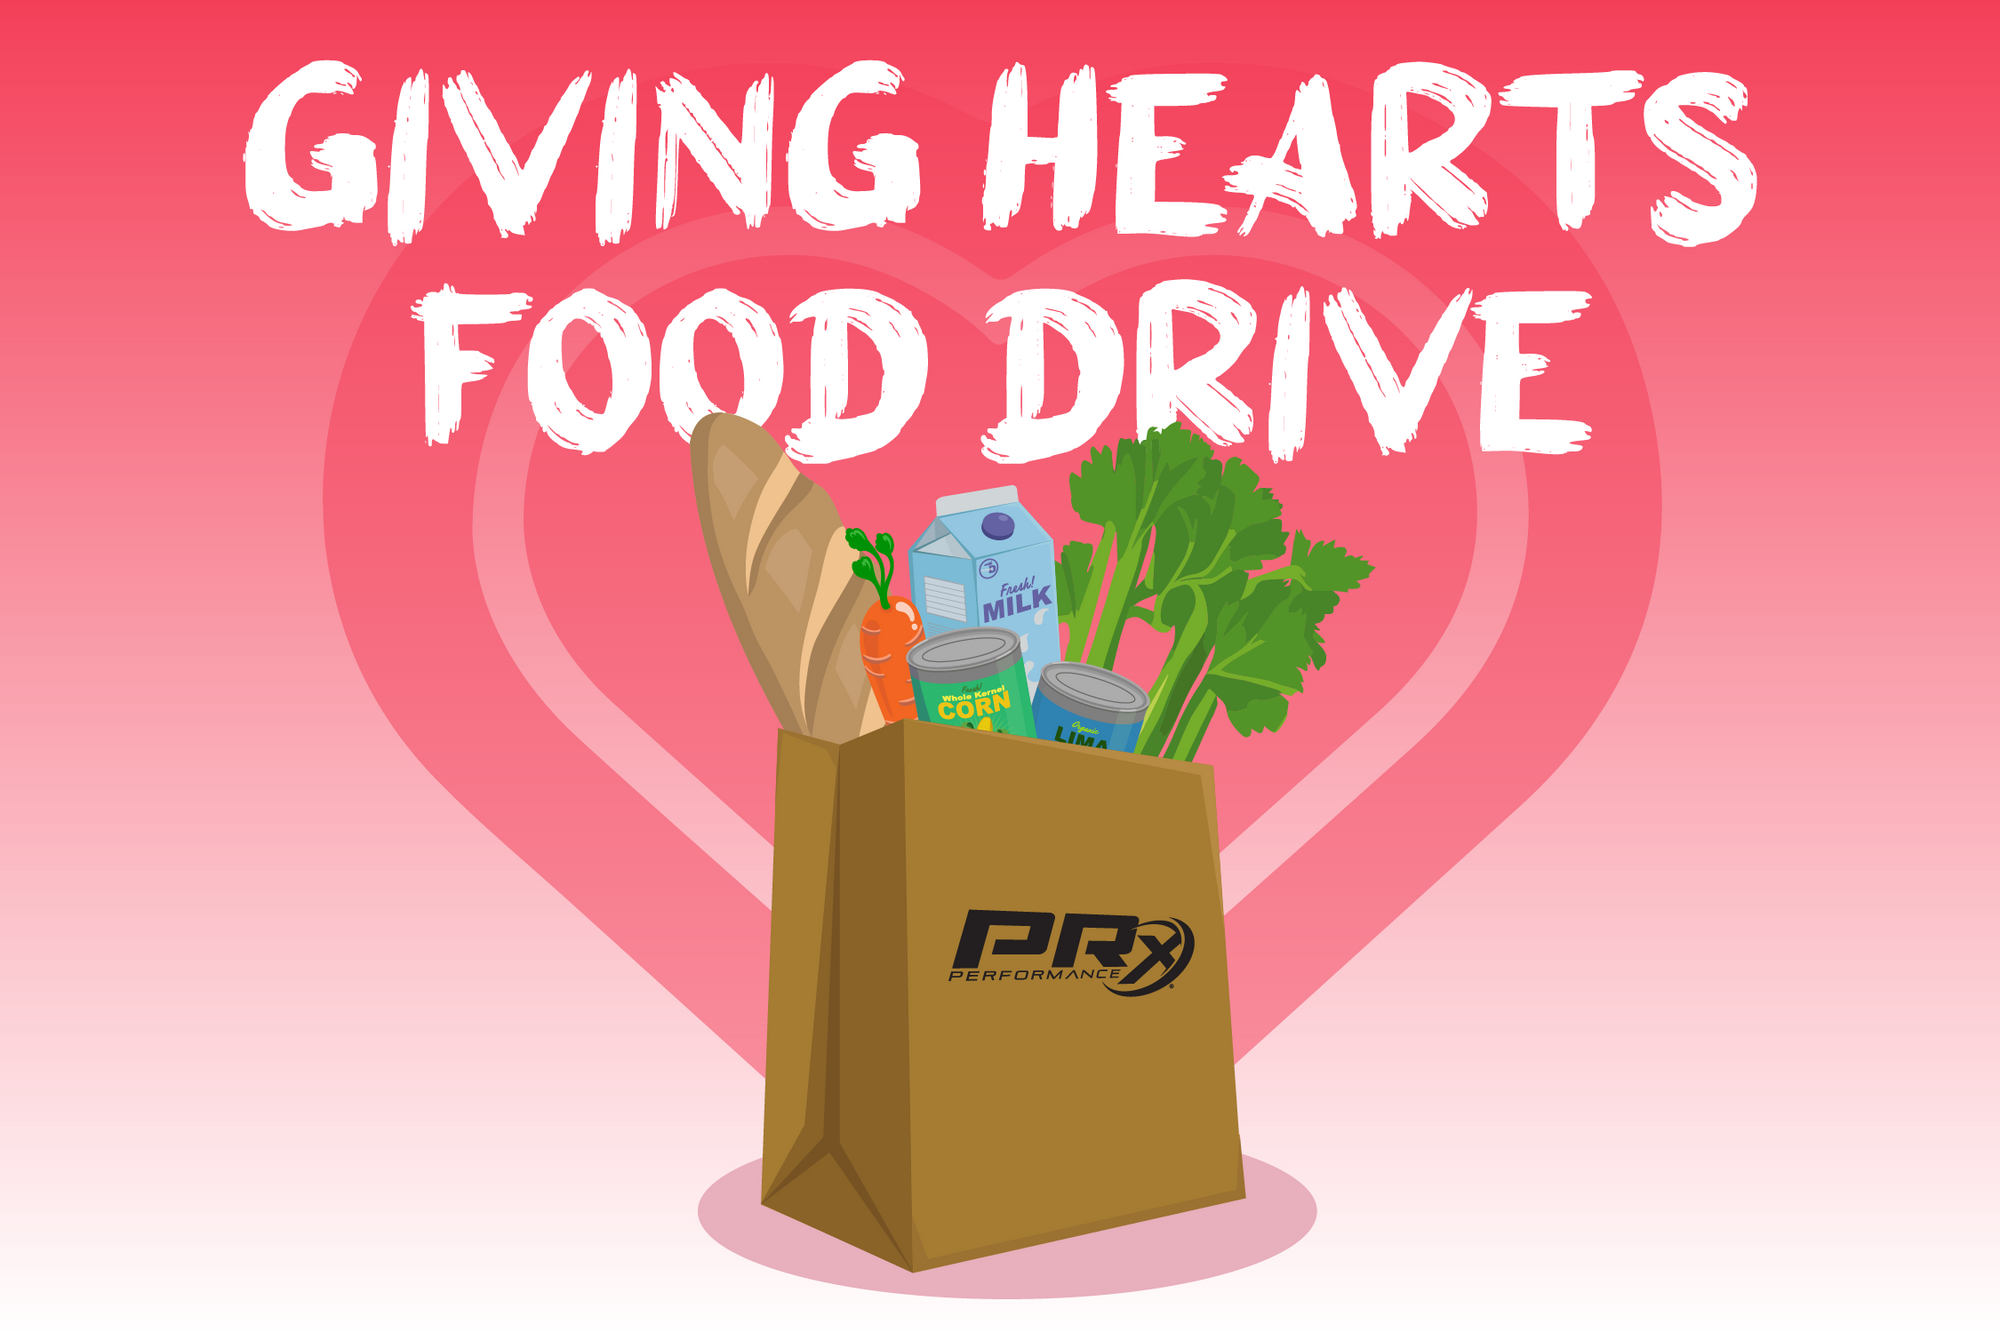 PRx Performance & CrossFit 701's Giving Hearts Food Drive